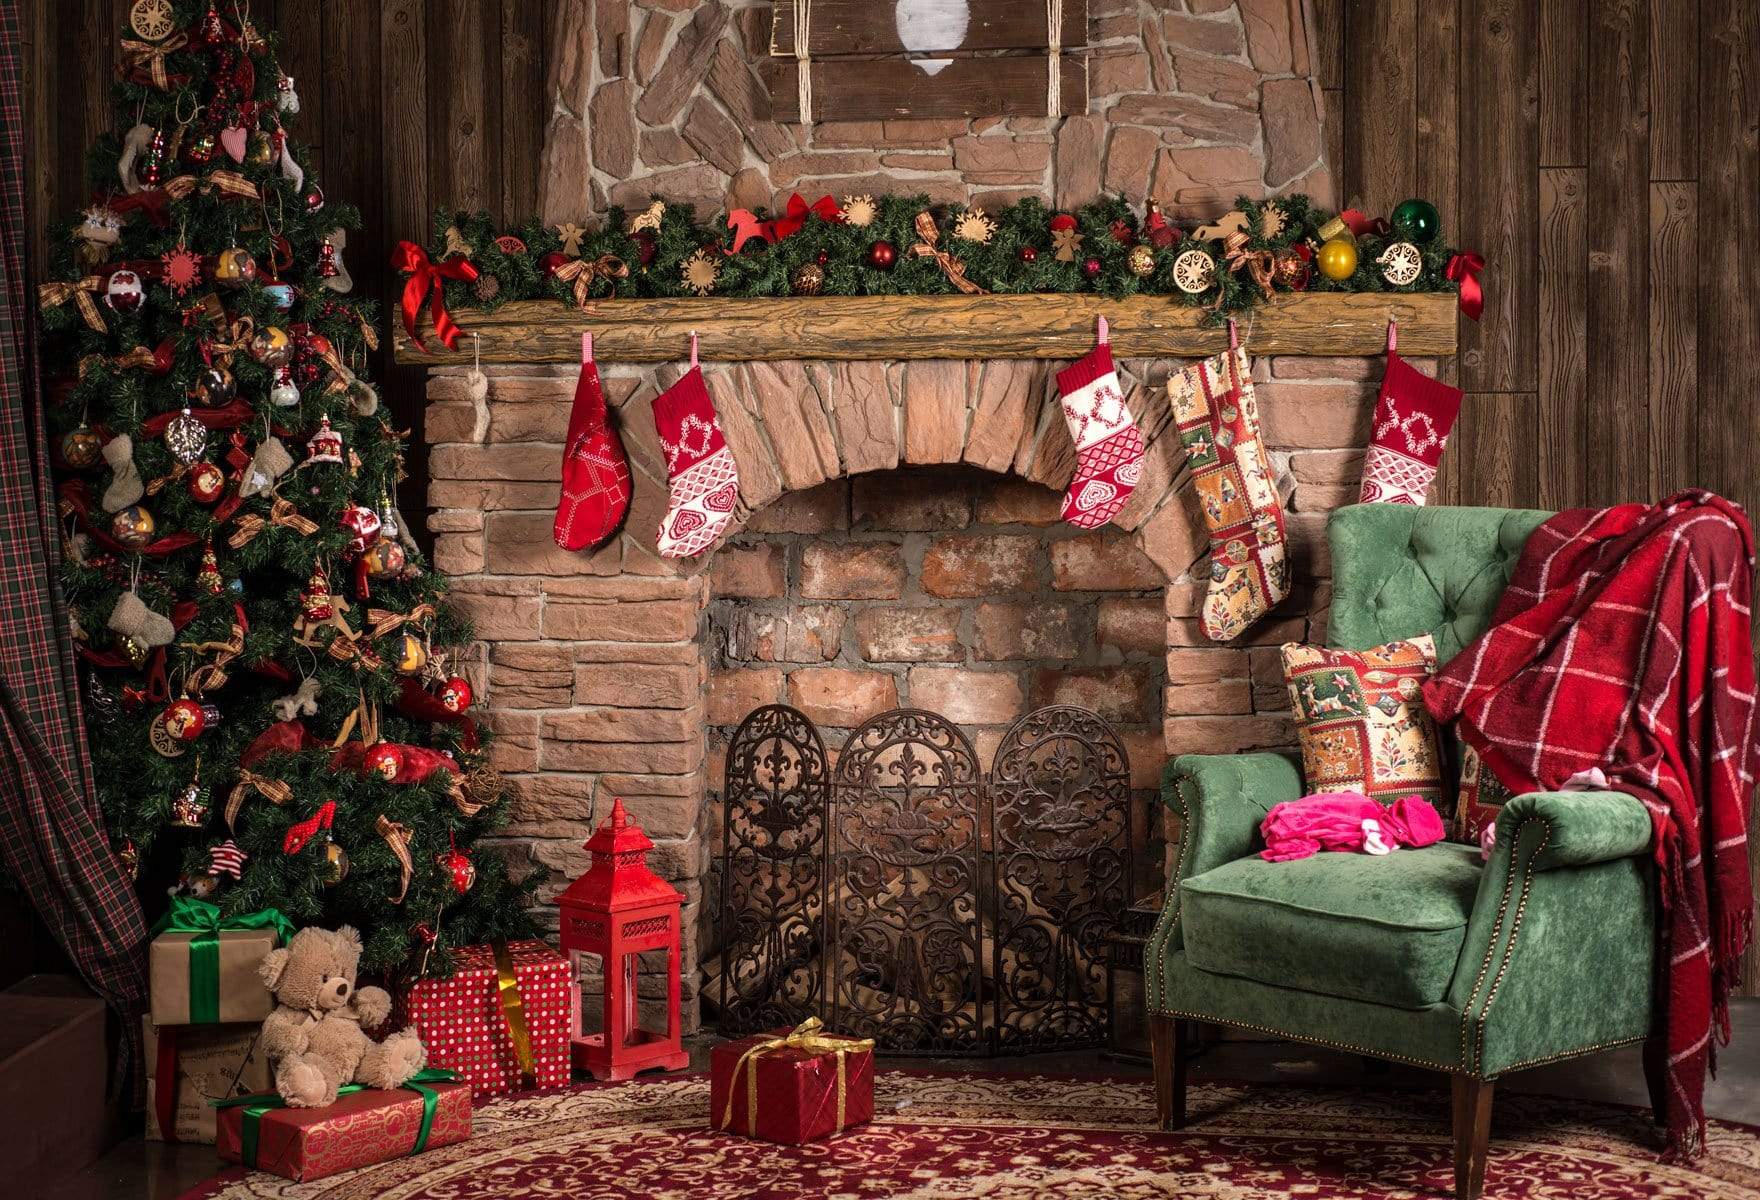 Kate Christmas Fireplace parlor Decorations Backdrop for Photography